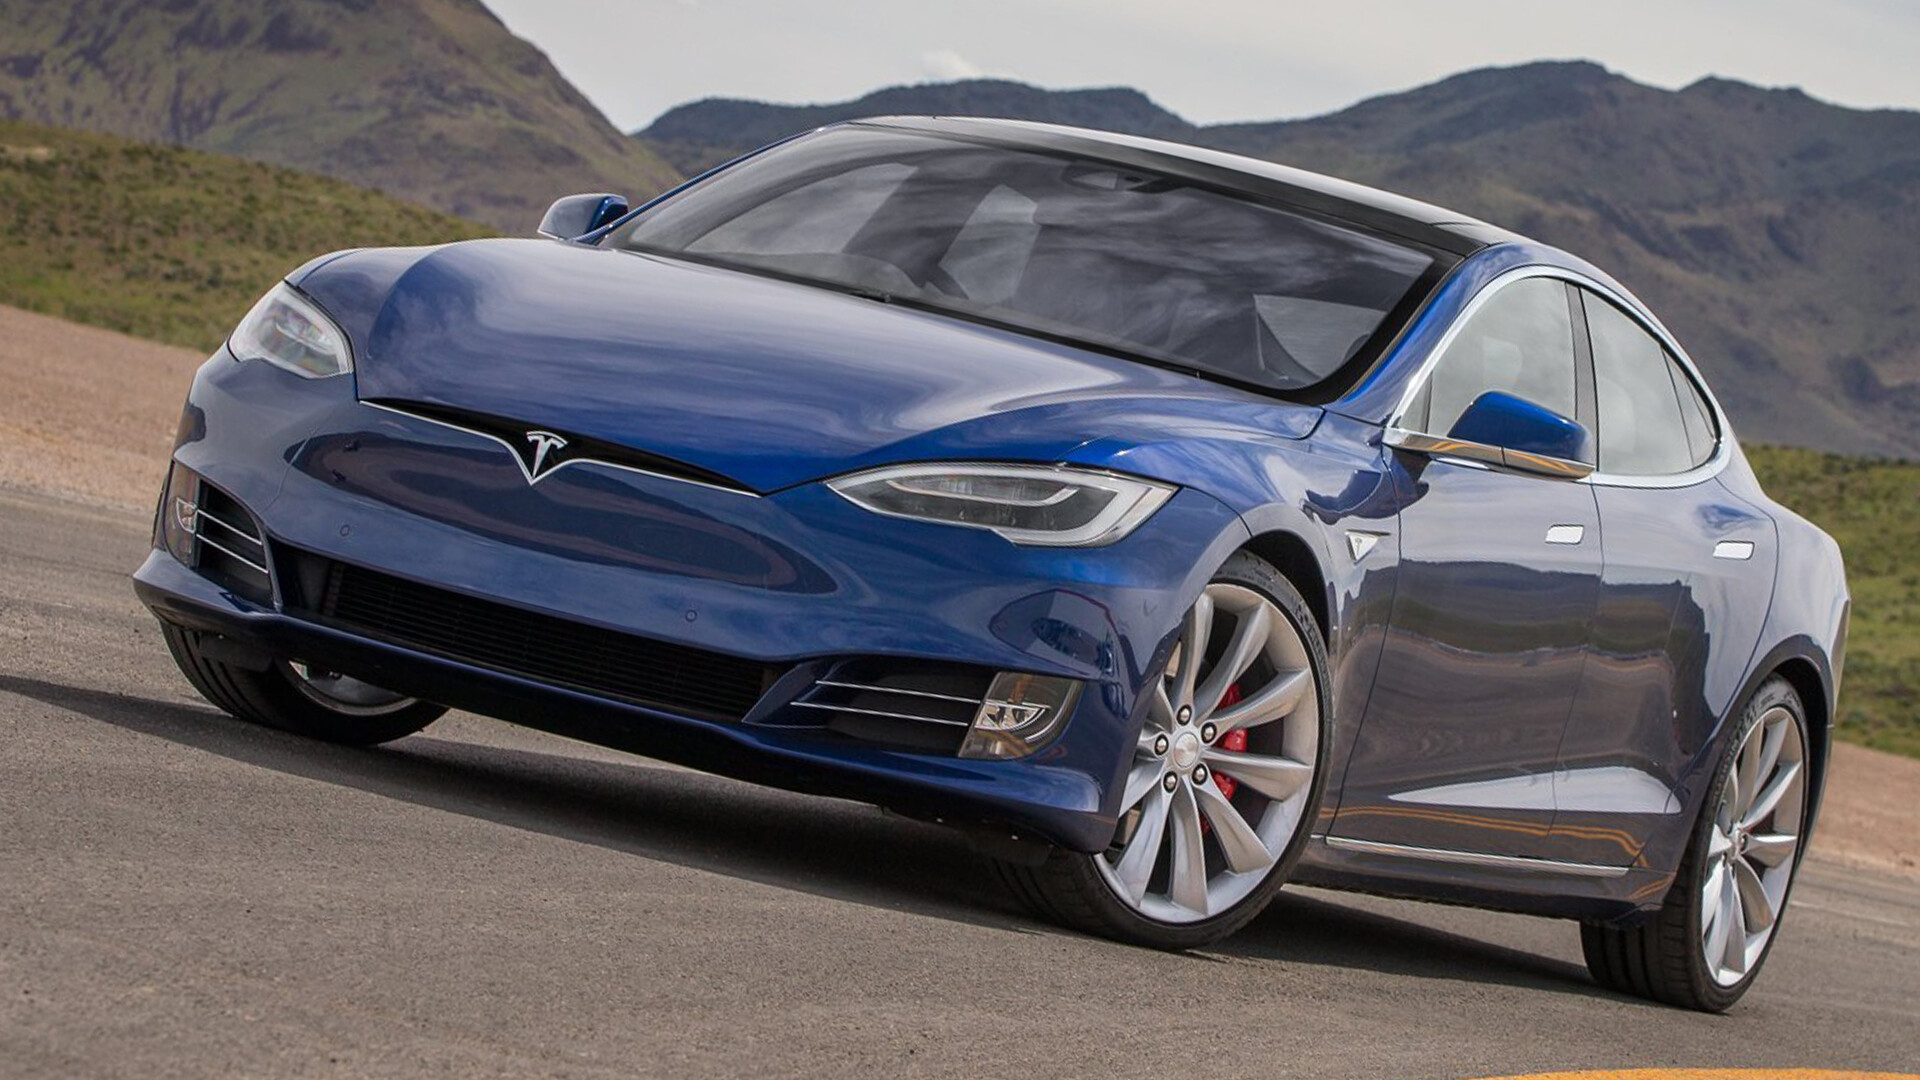 Tesla Model S: American all-electric car, Has a range of over 300 miles. 1920x1080 Full HD Background.